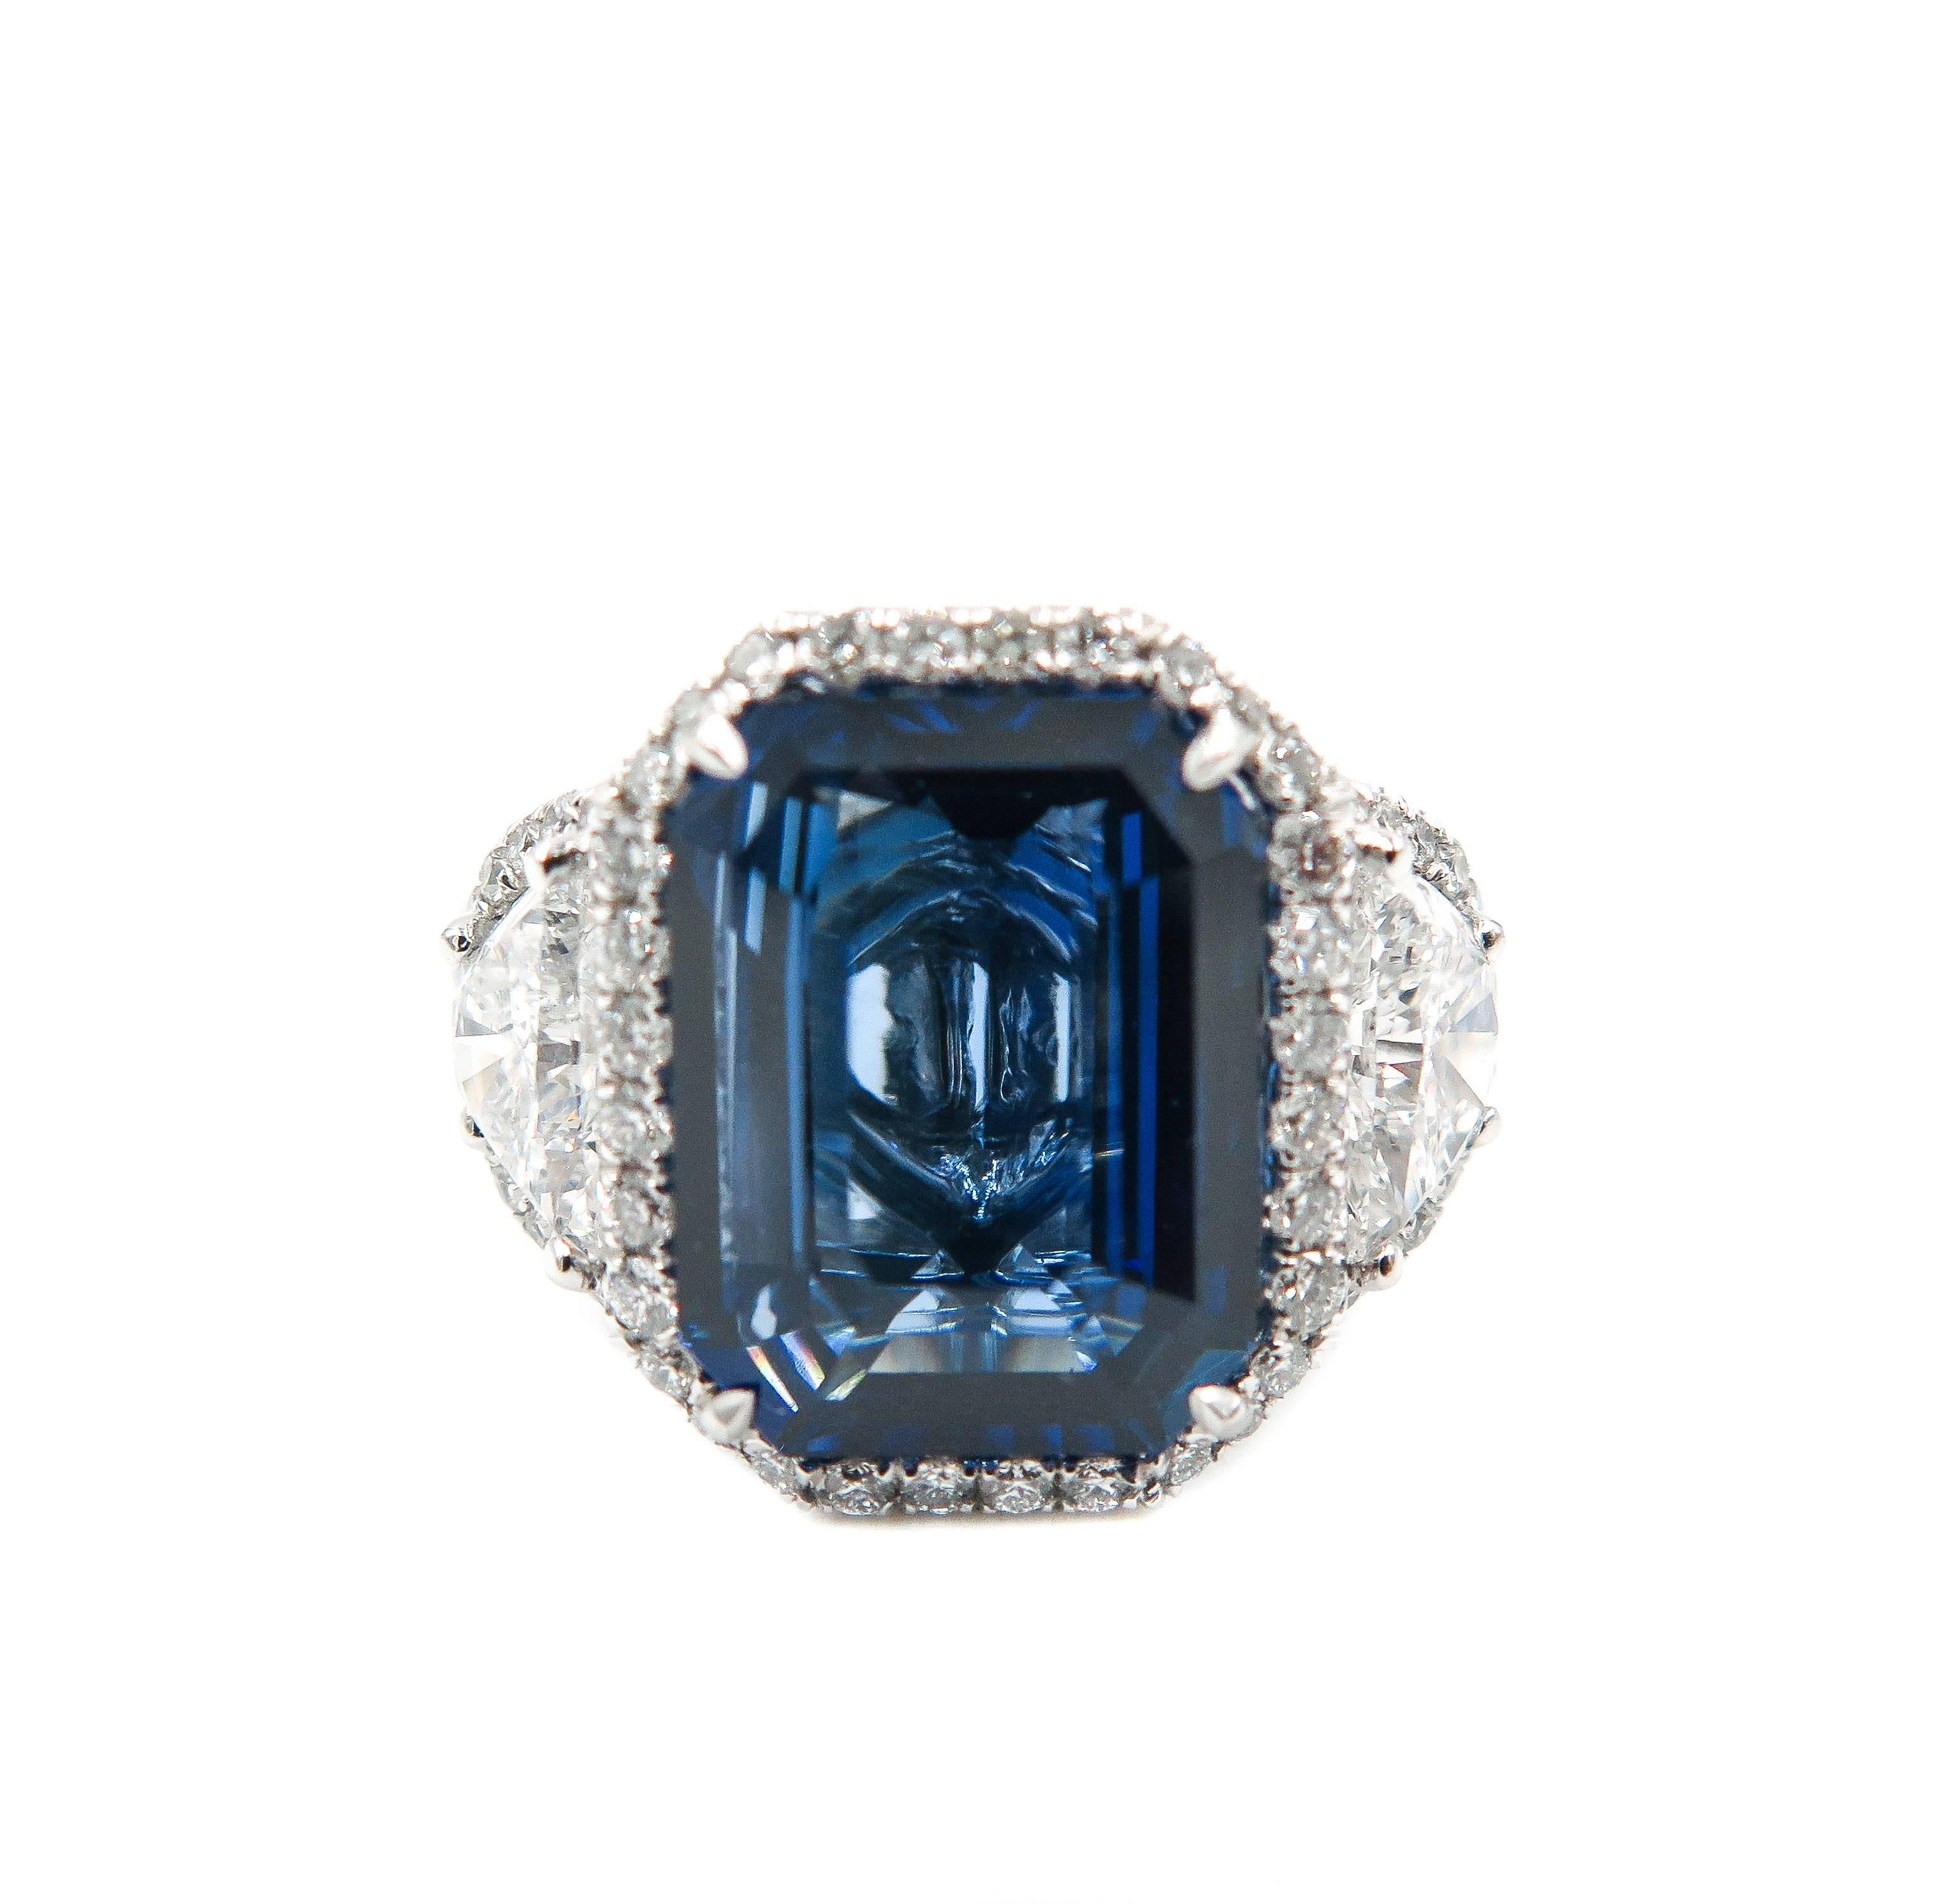 This exquisite masterpiece is designed for the modern woman who aspires to create her own story with this amazing emerald cut unheated Ceylon Sapphire.
GRS certified from Sri Lanka, this sapphire weighs 6.08 carats, and is flanked by 2 half-moon